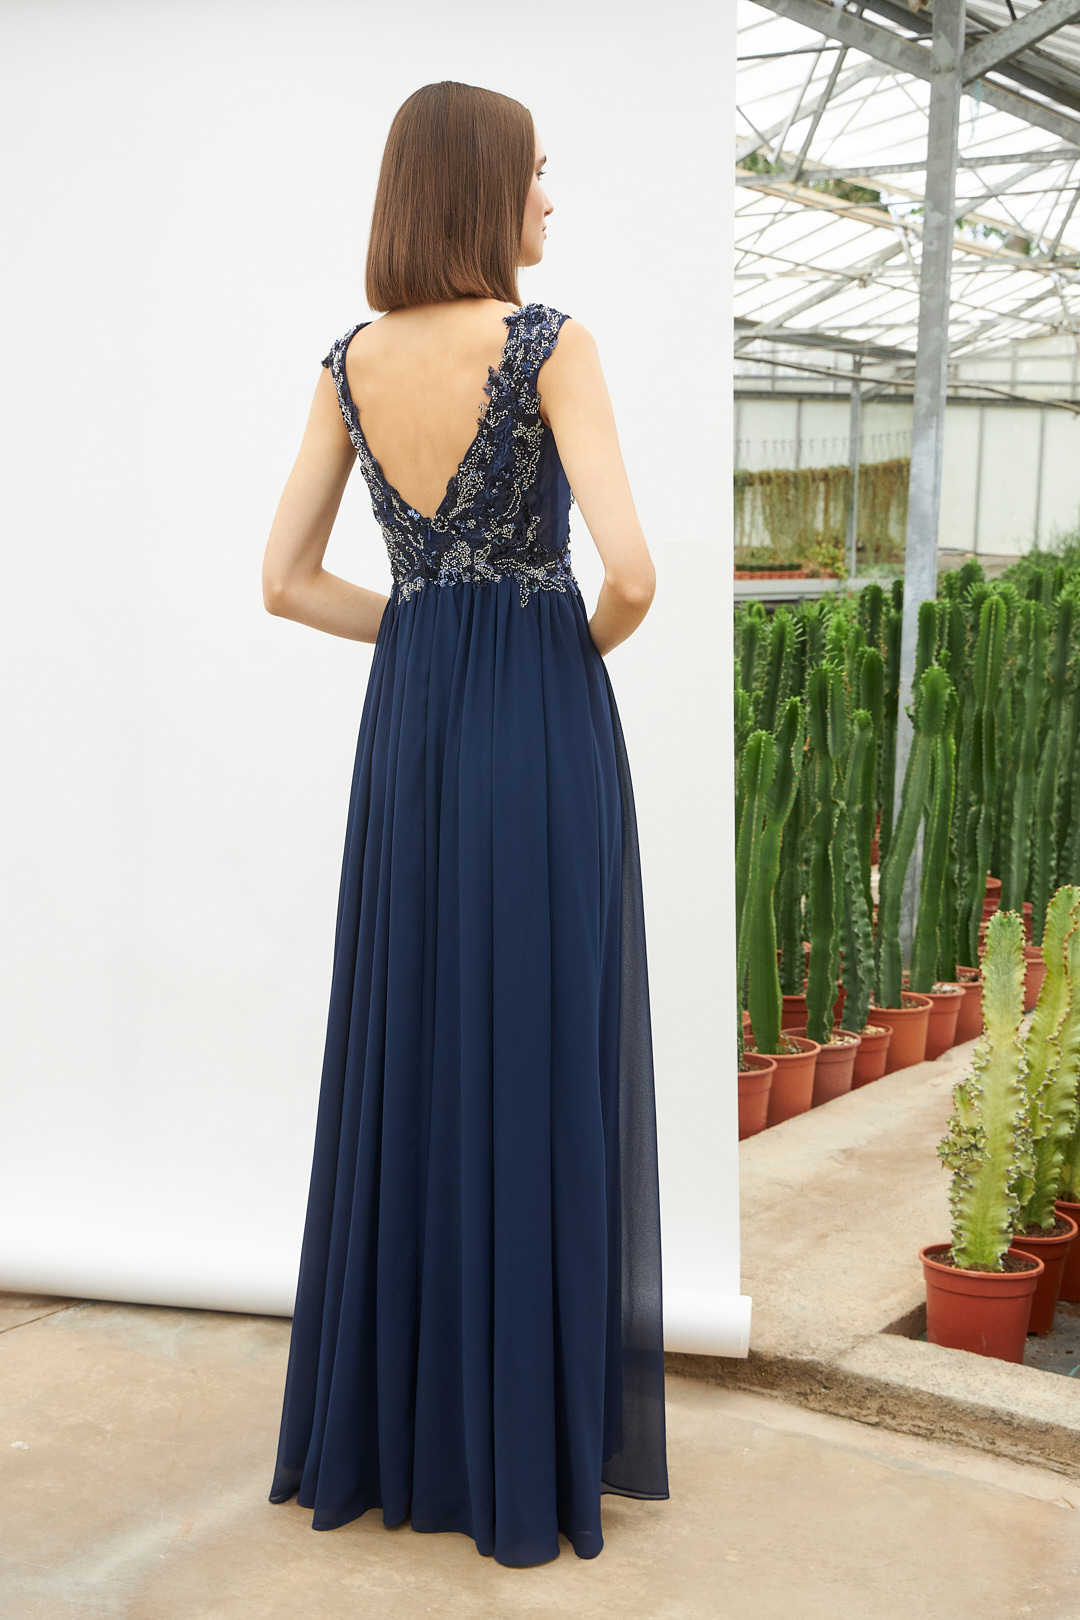 Classic Dresses / Long classic dresss with fuly beaded top and wide straps